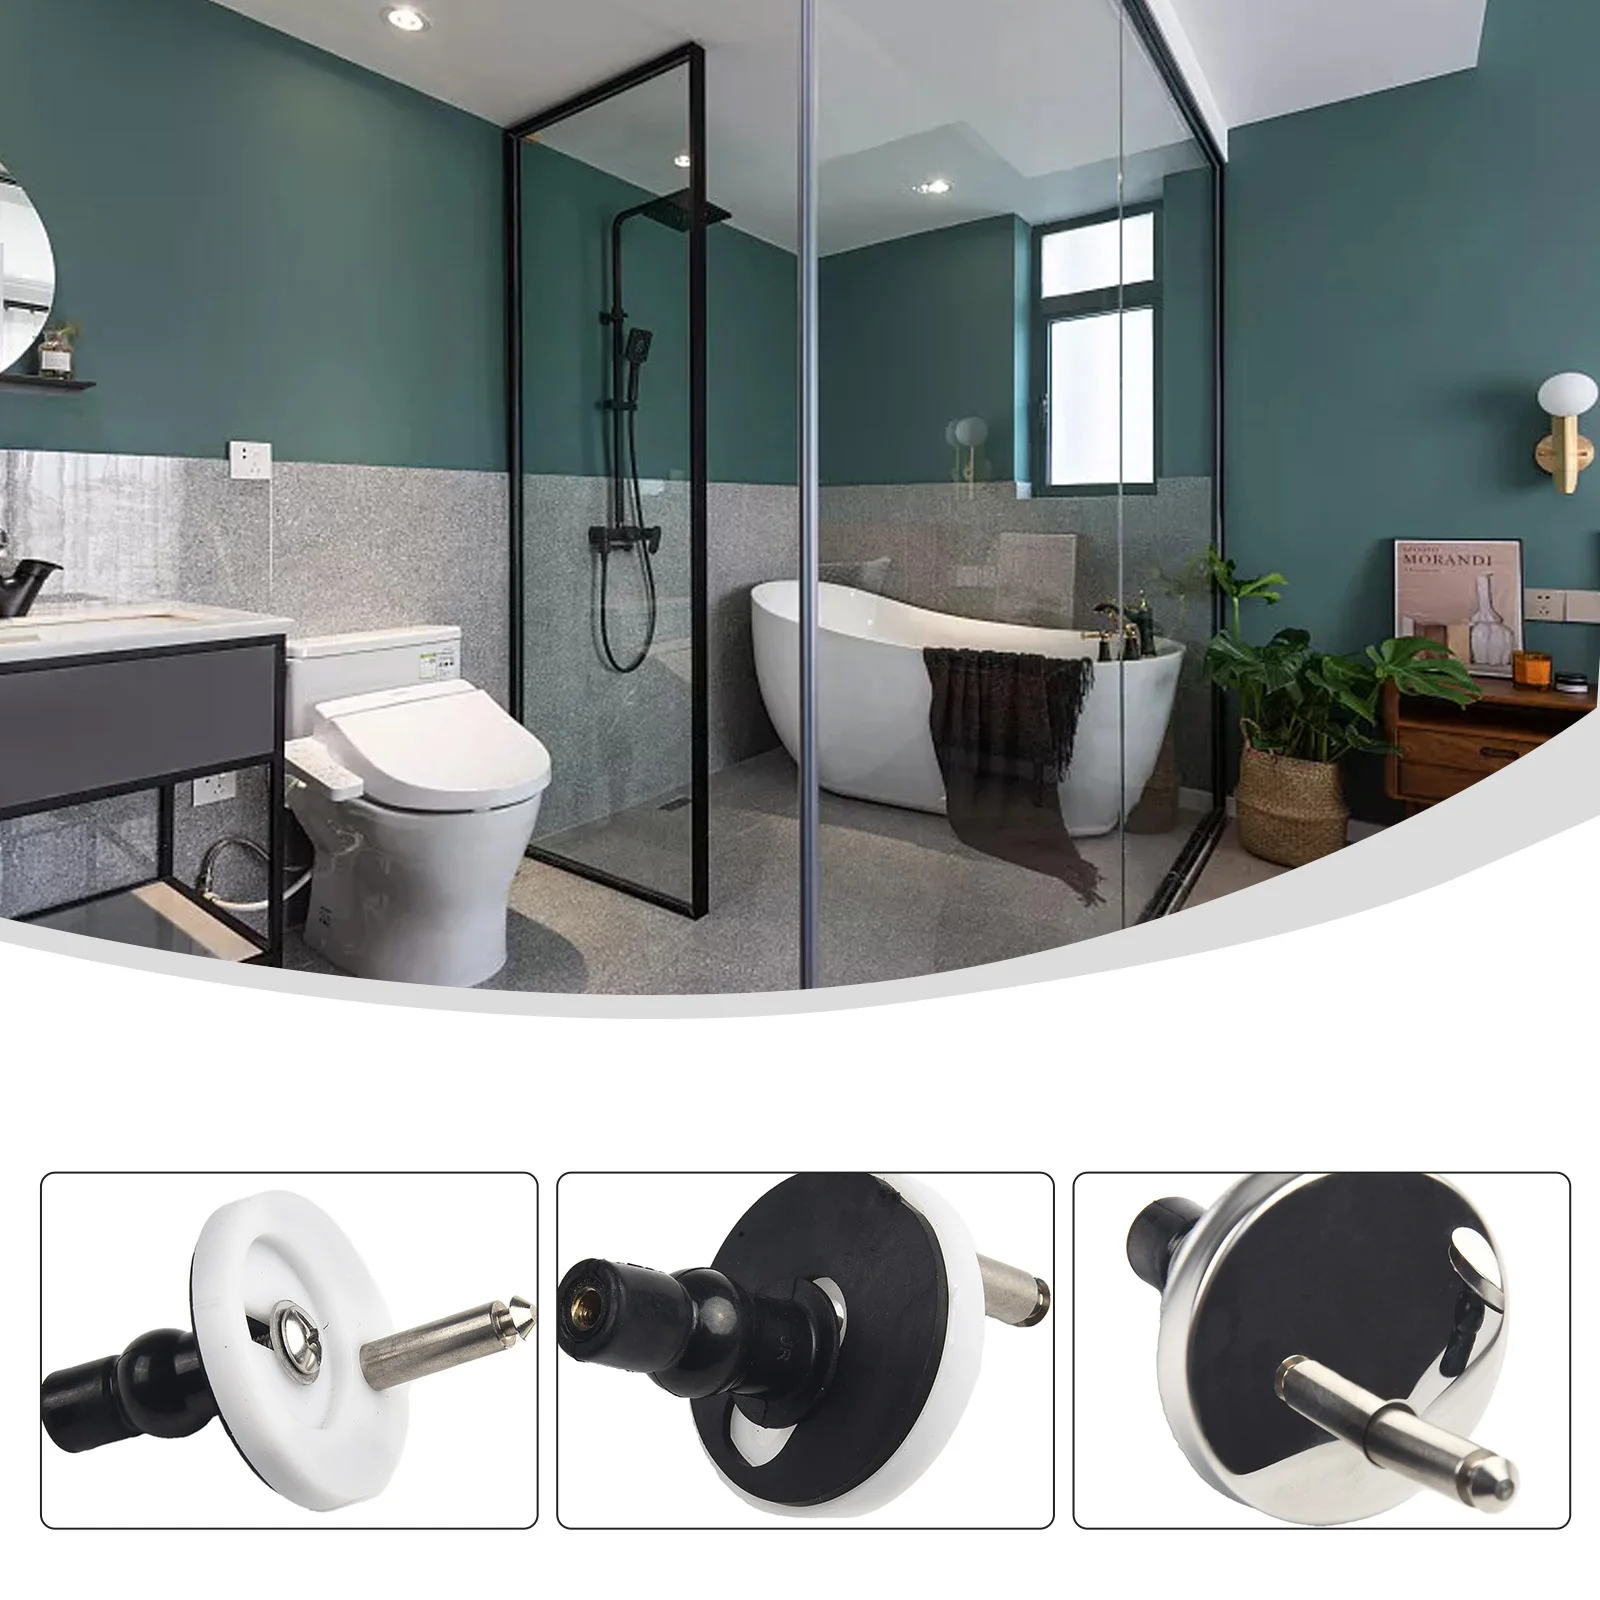 

Hinge Pack Toilet Hinge None 50mm Fitting Heavy Duty Soft Top Close 2pcs。 Toilet Hinges Hinge Pair Quick Release